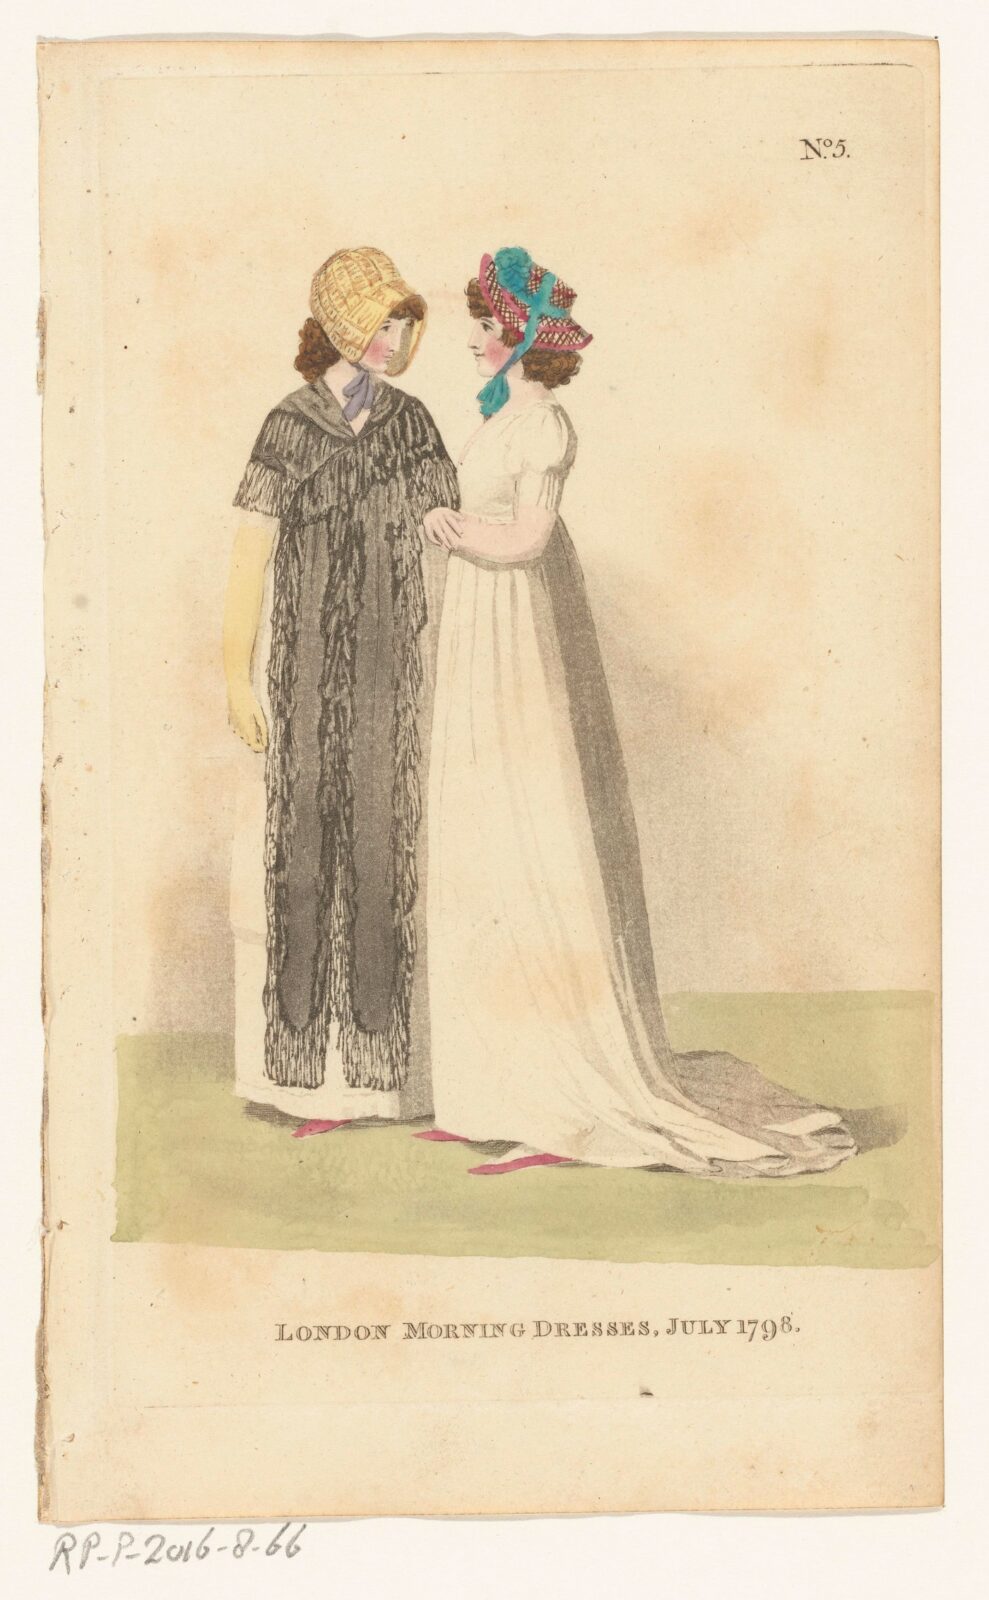 ‘London Morning Dress’, The Lady’s Magazine, July 1798, engraving and watercolour on paper. Rijksmuseum, Amsterdam